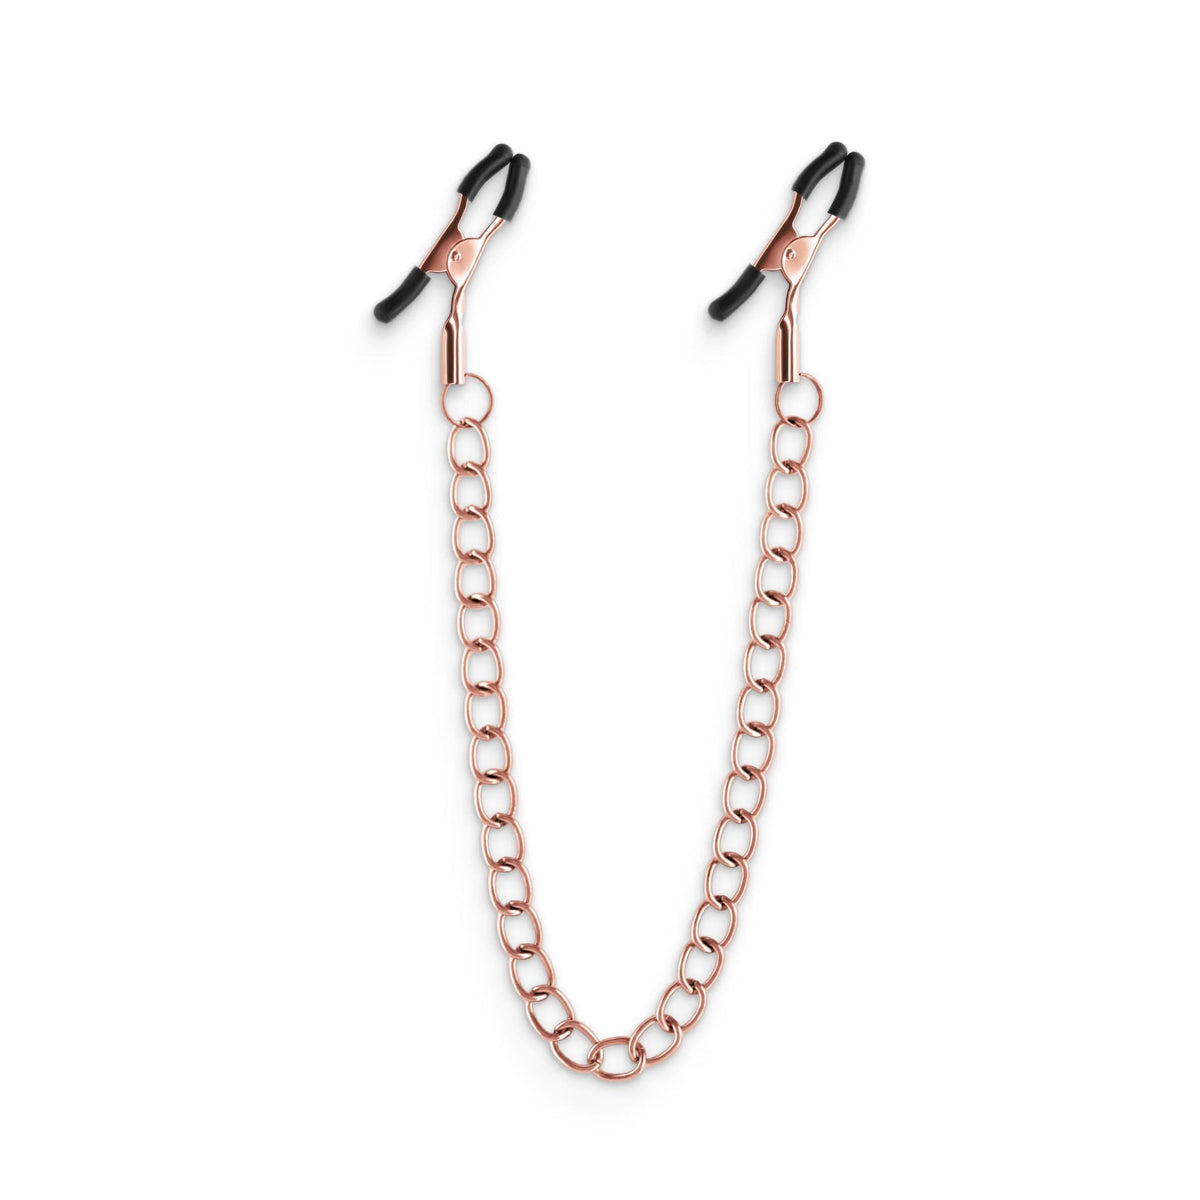 bound nipple clamps dc2 rose gold